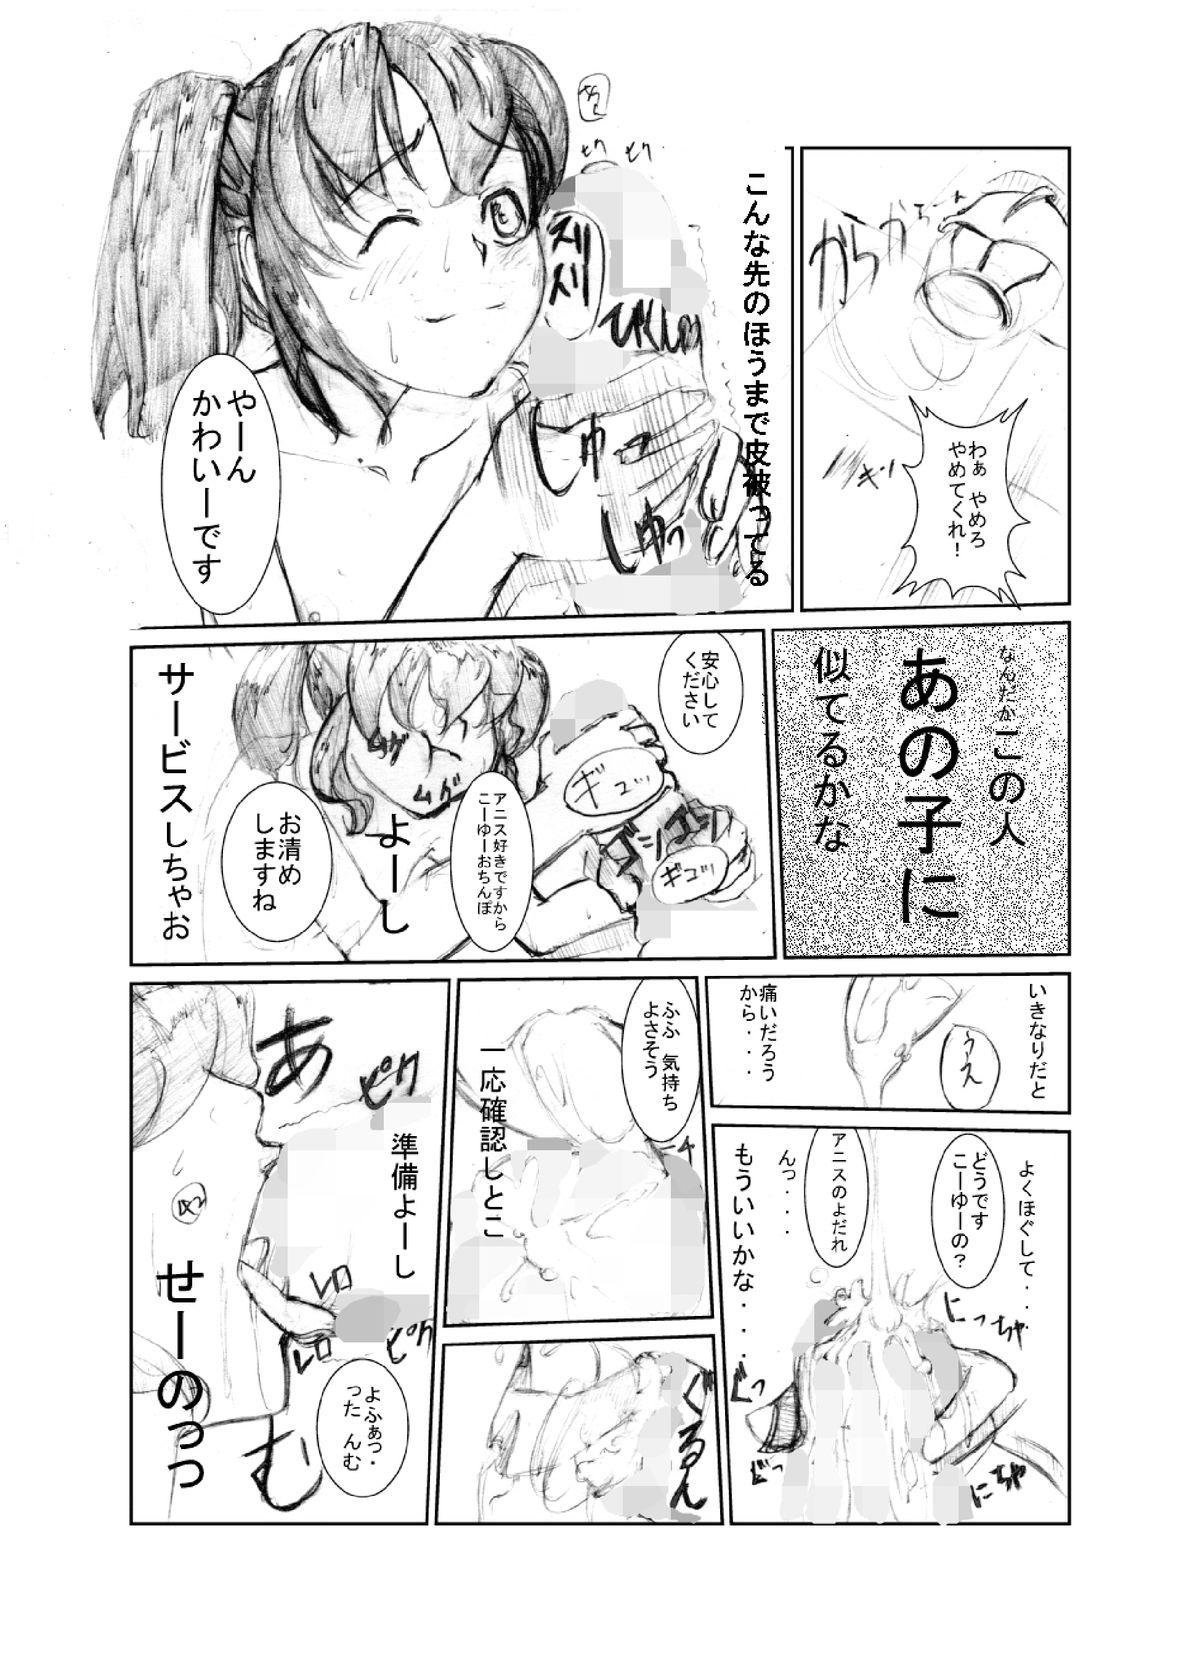 Amateur 虹は溶けゆく 朝焼けに - Tales of the abyss Hungarian - Page 11